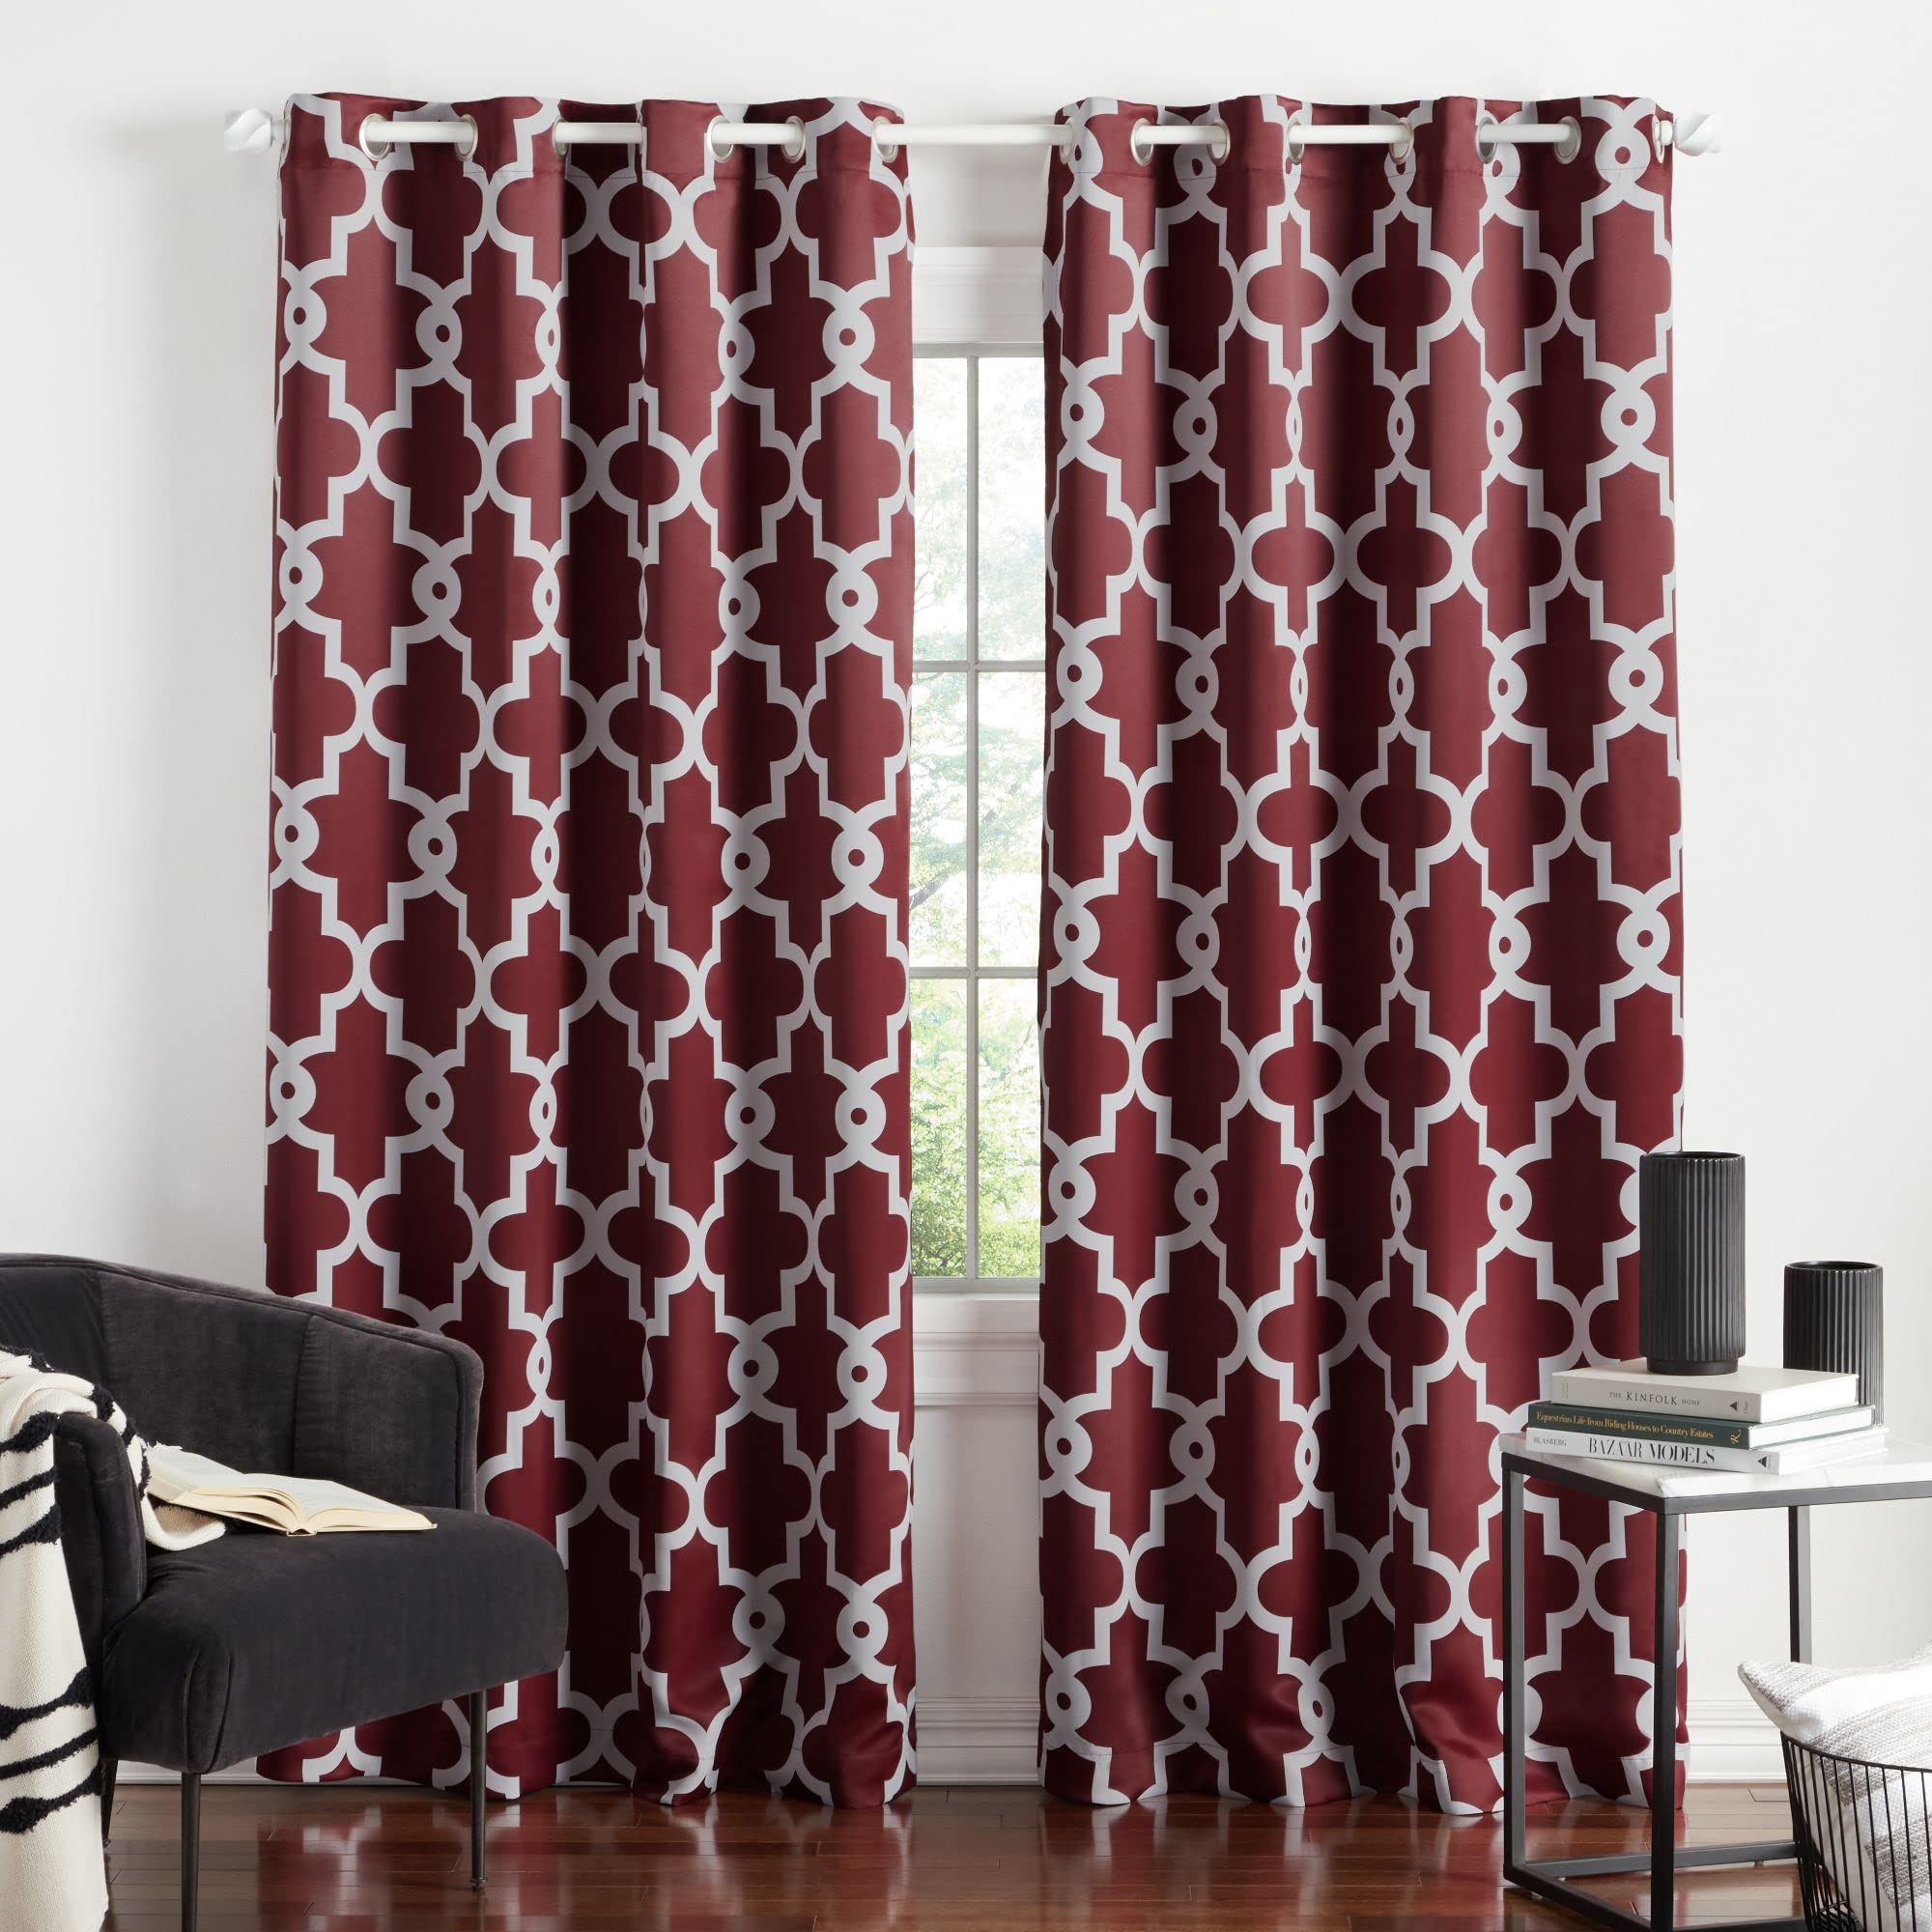 Book Cover Exclusive Home Curtains Ironwork Woven Blackout Grommet Top Panel Pair, Burgundy, 52x84, 2 Piece 52x84 Ironwork Burgundy